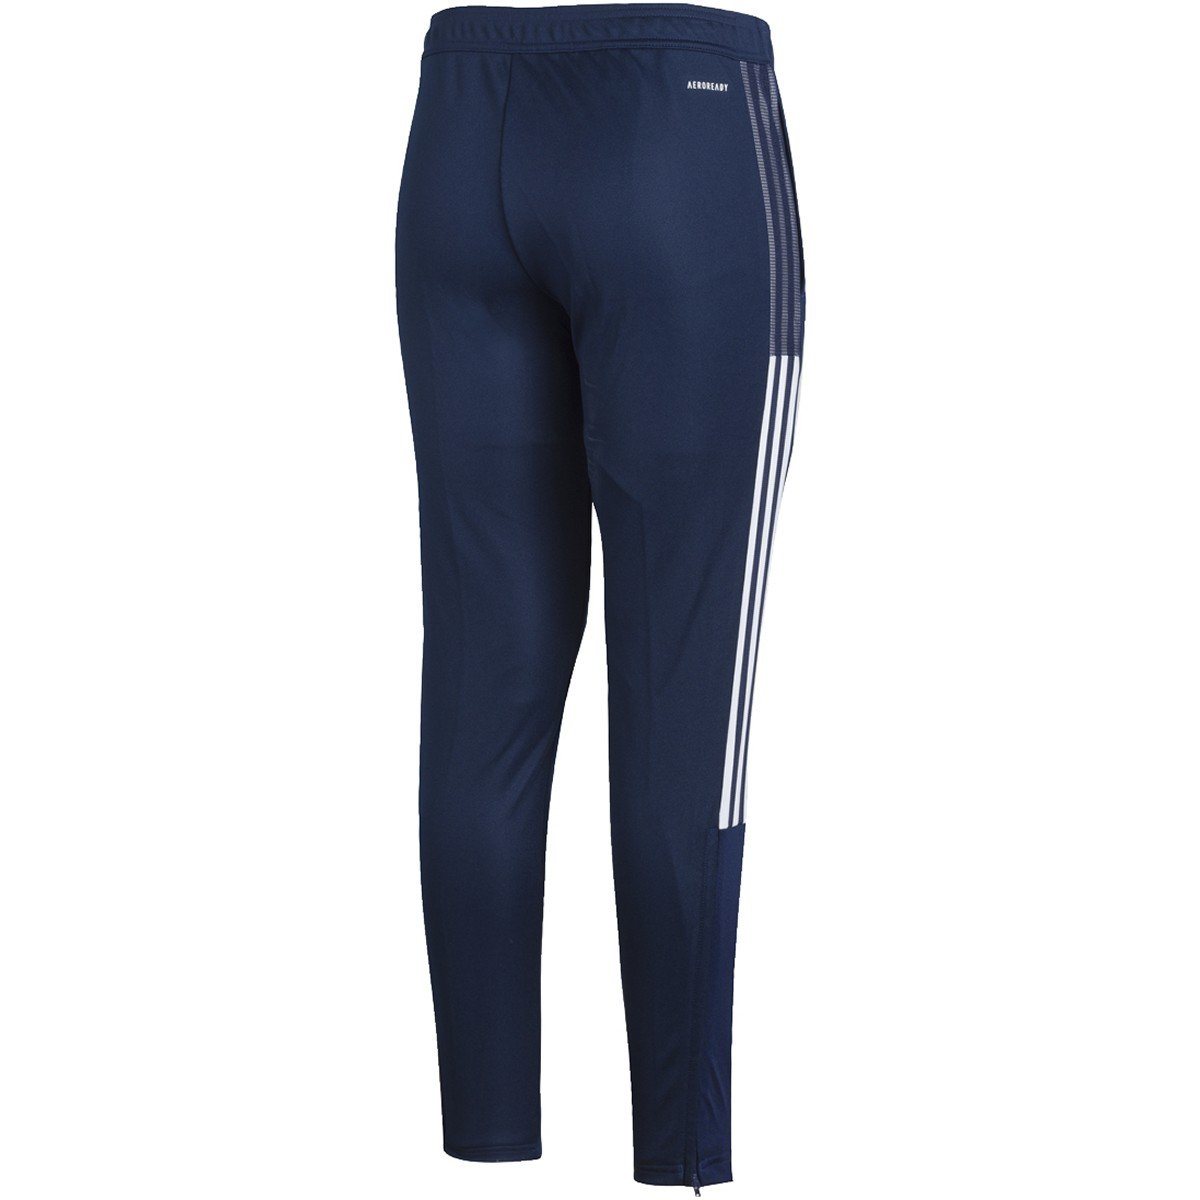 adidas Women's Tiro 21 Track Pant. New with original tag attached